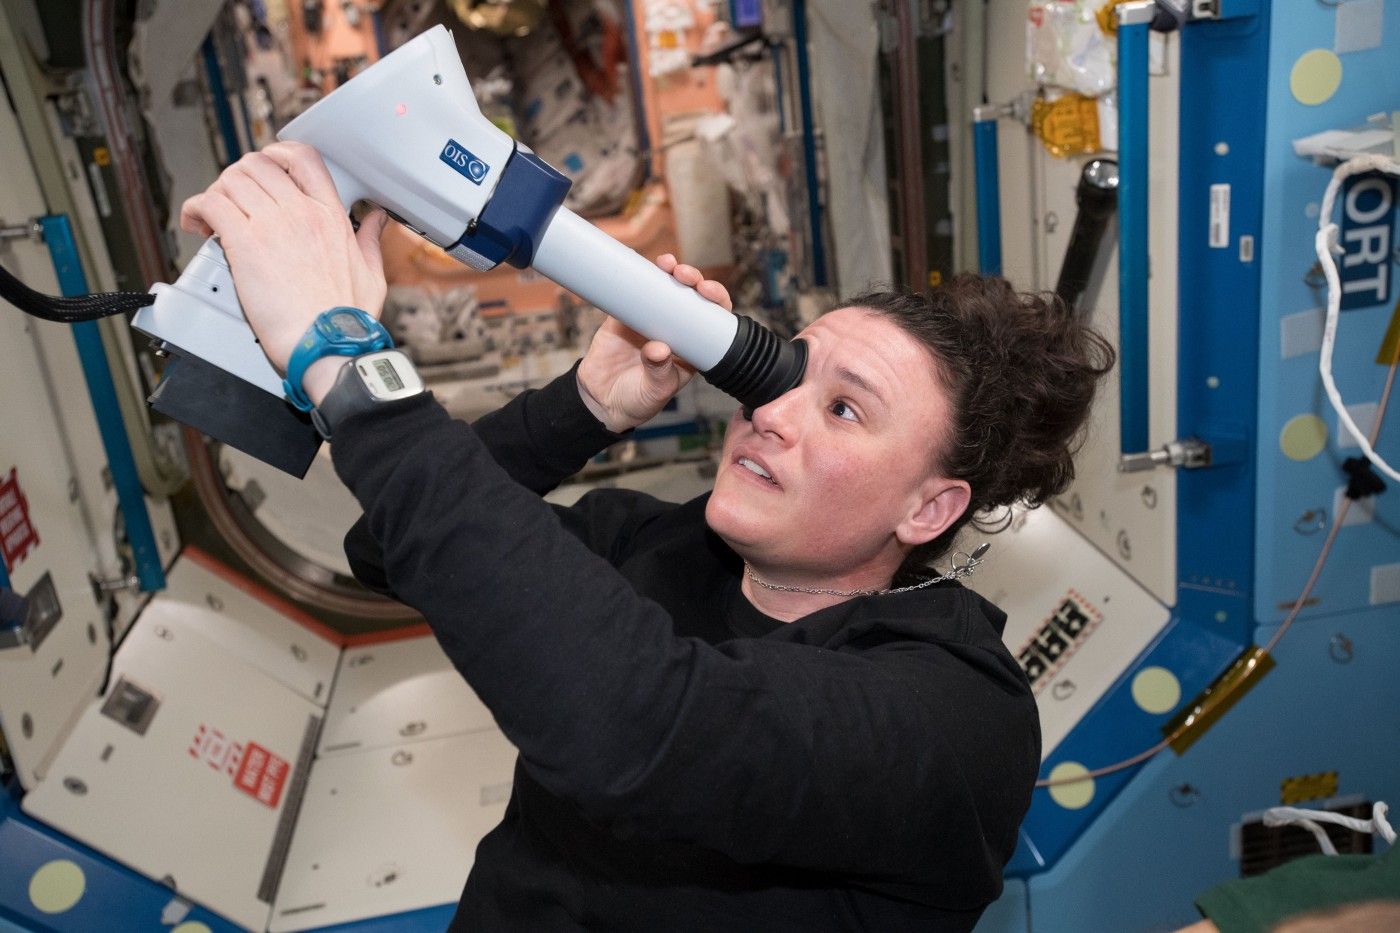 A photo from NASA’s tweet about Dr. Auñón-Chancellor on the International Space Station, where a young woman looks through a telescopic instrument.